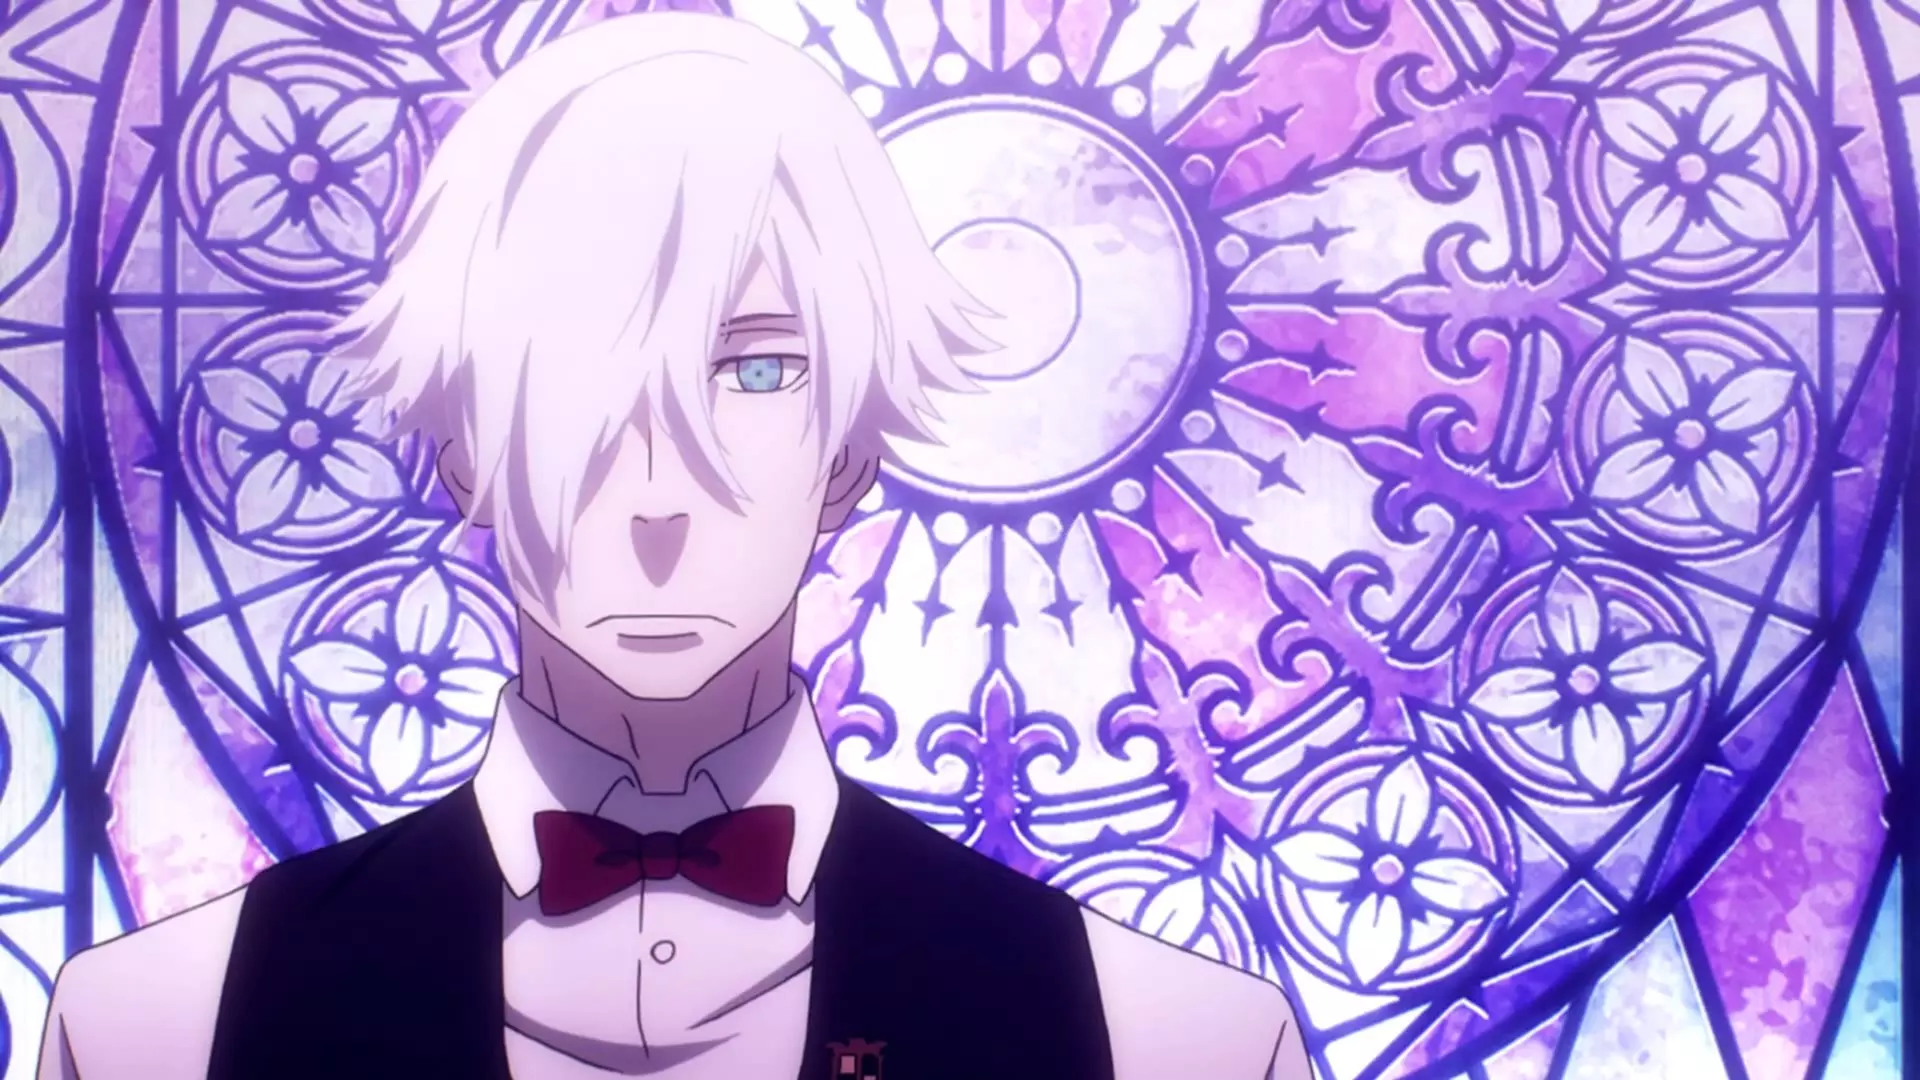 Dekim's character in front of a stained glass in the anime Death Parade